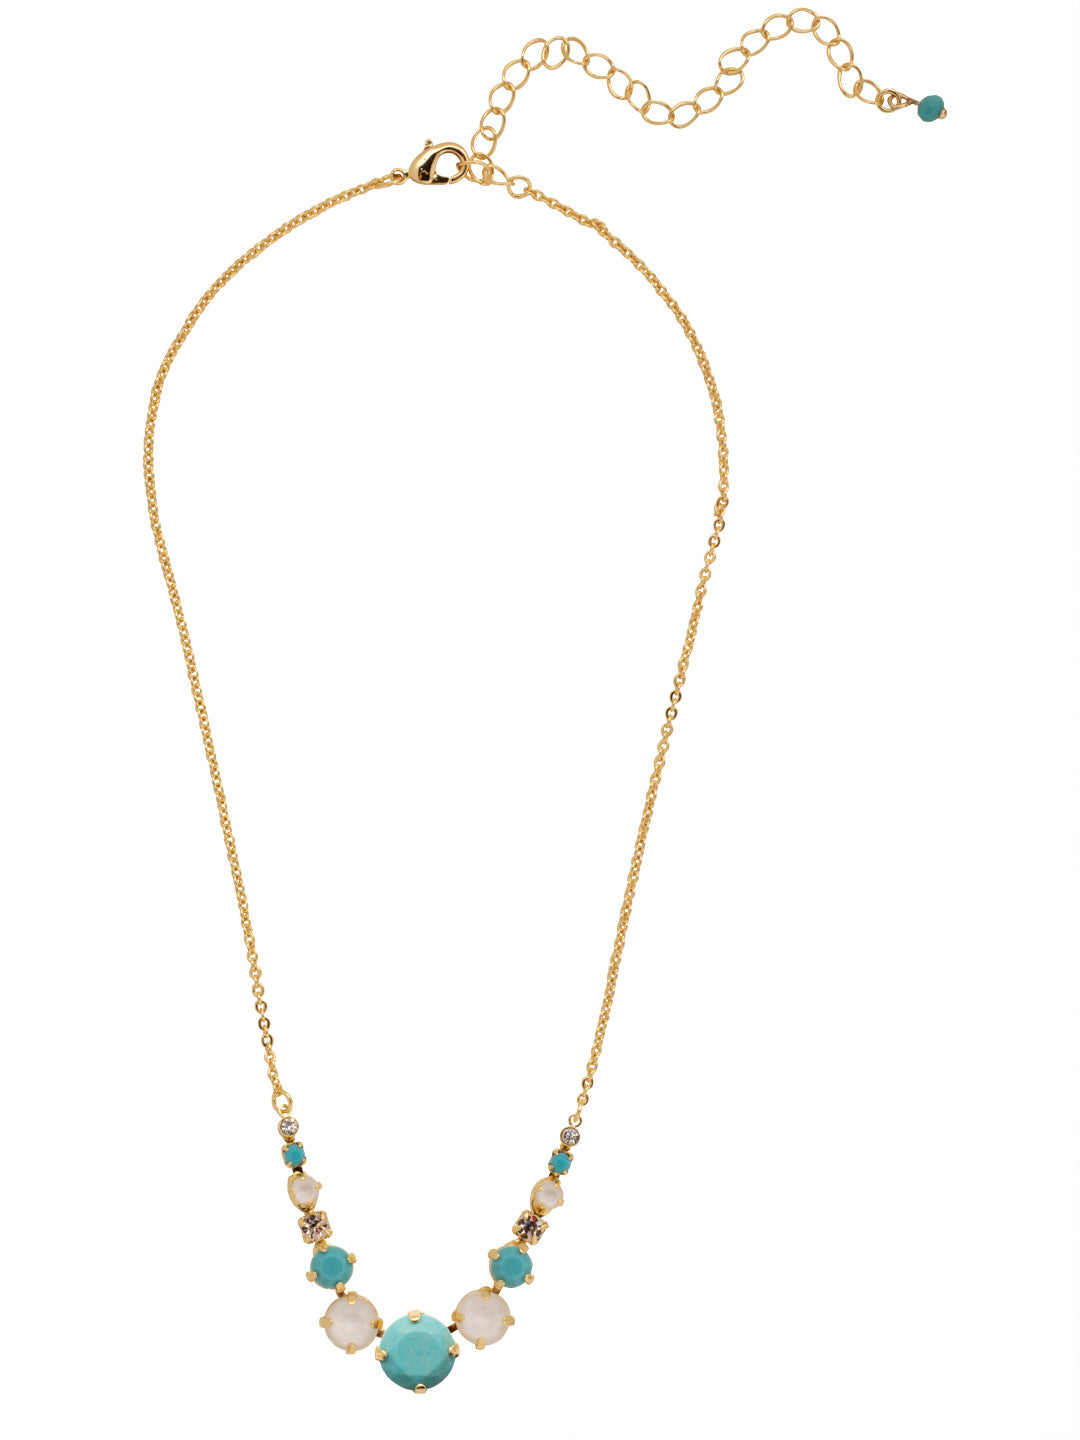 London Tennis Necklace - NCQ14BGSTO - <p>A long, simple chain paired with gorgeous round stones is exactly what every girl needs to dress things up. This round stone necklace is perfect for layering, or to just wear alone. Let the simple sparkle take over. From Sorrelli's Santorini collection in our Bright Gold-tone finish.</p>